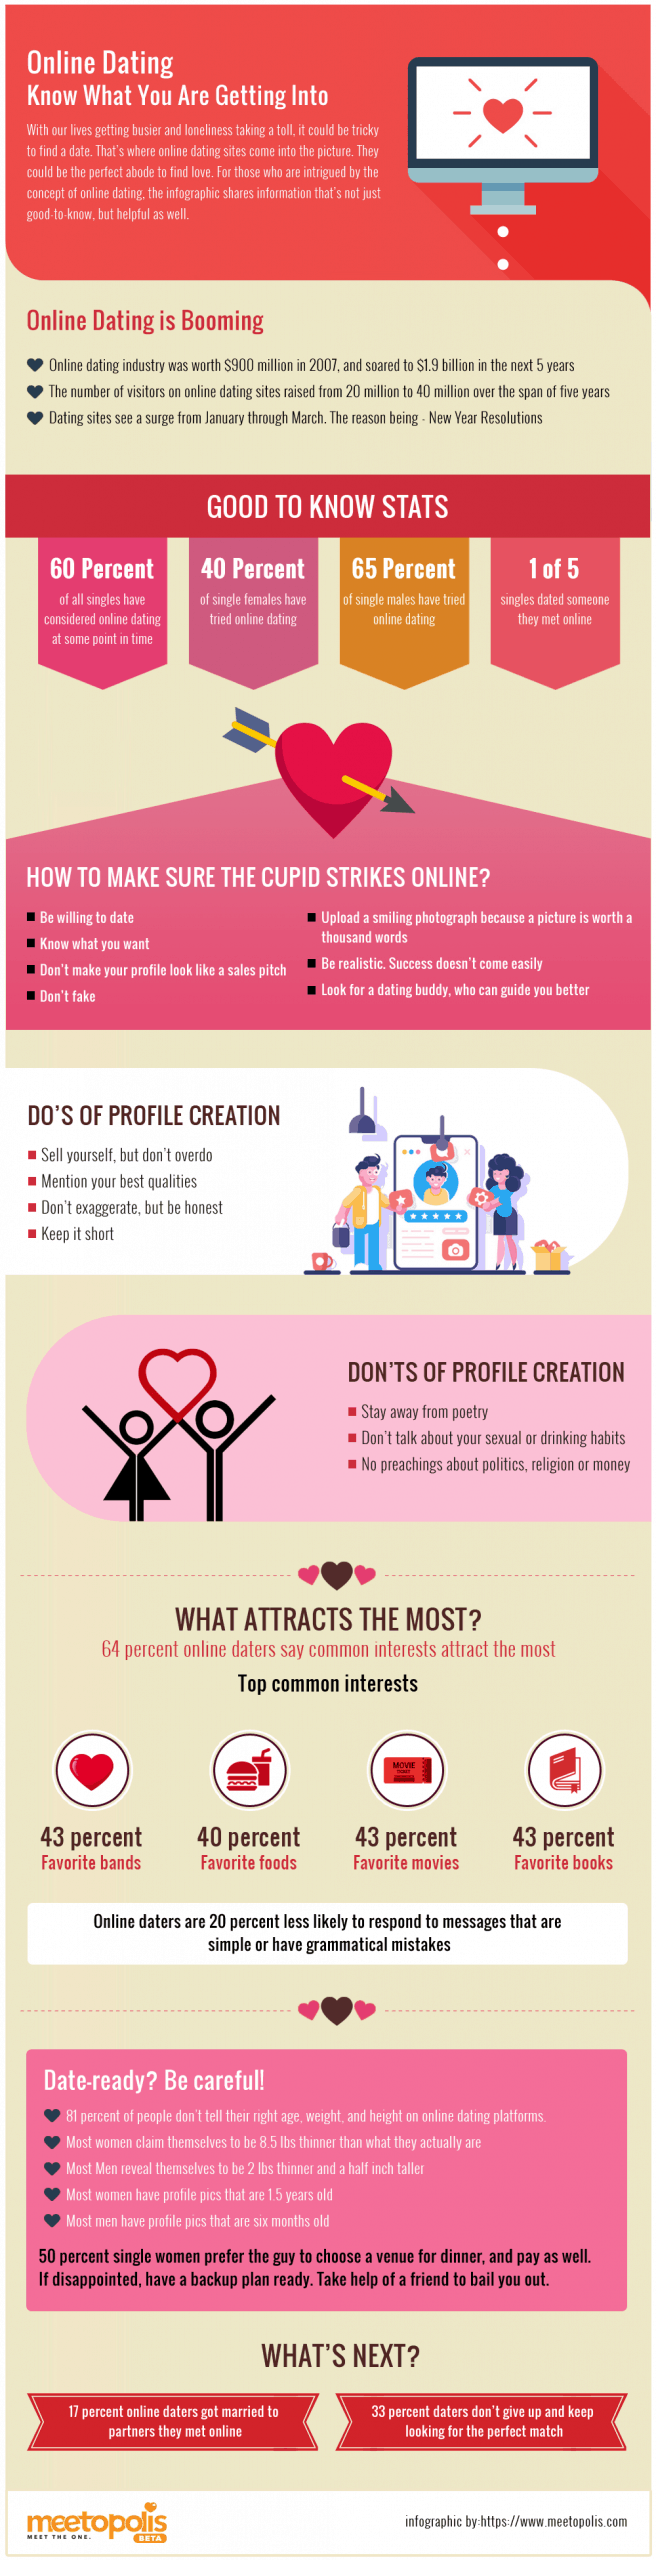 online dating stats infographic